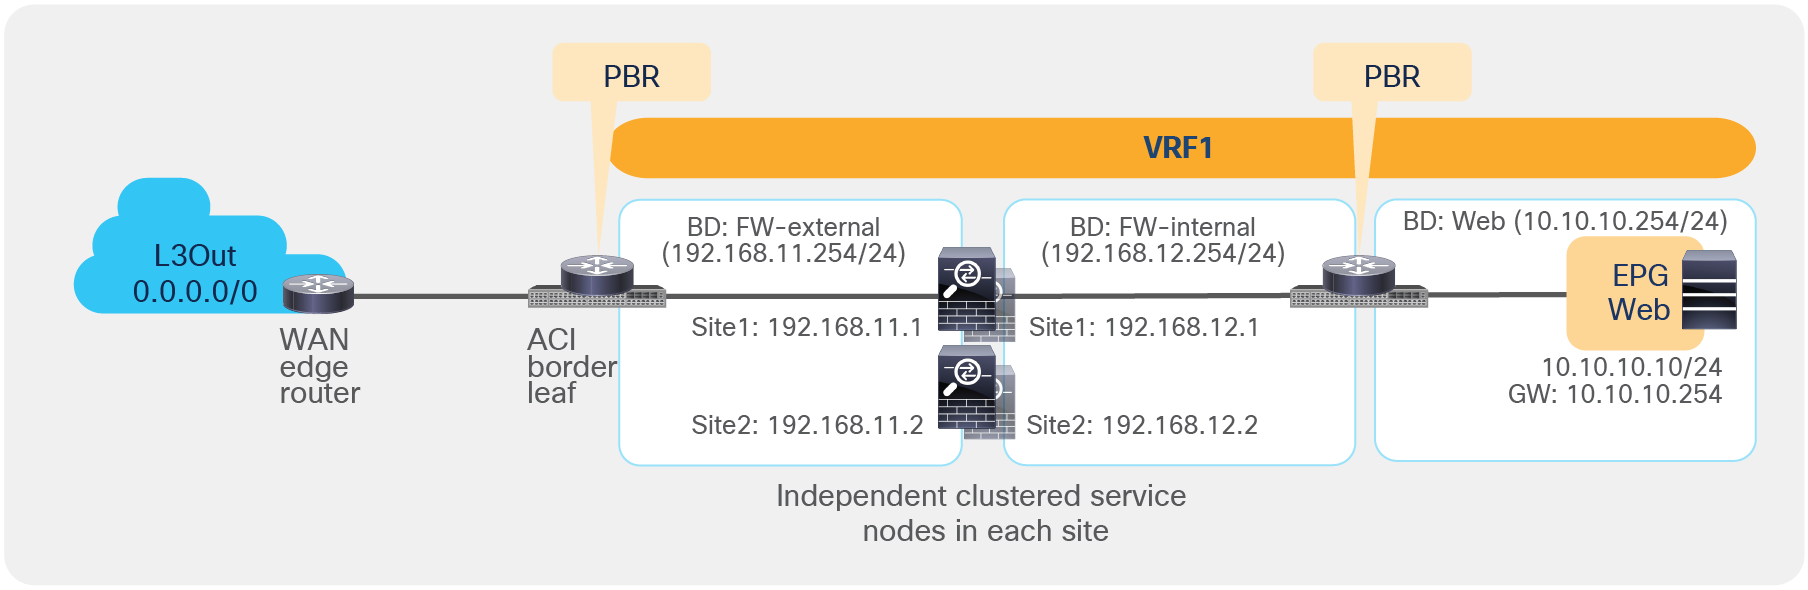 Example of a north-south firewall with PBR design (intra-VRF)